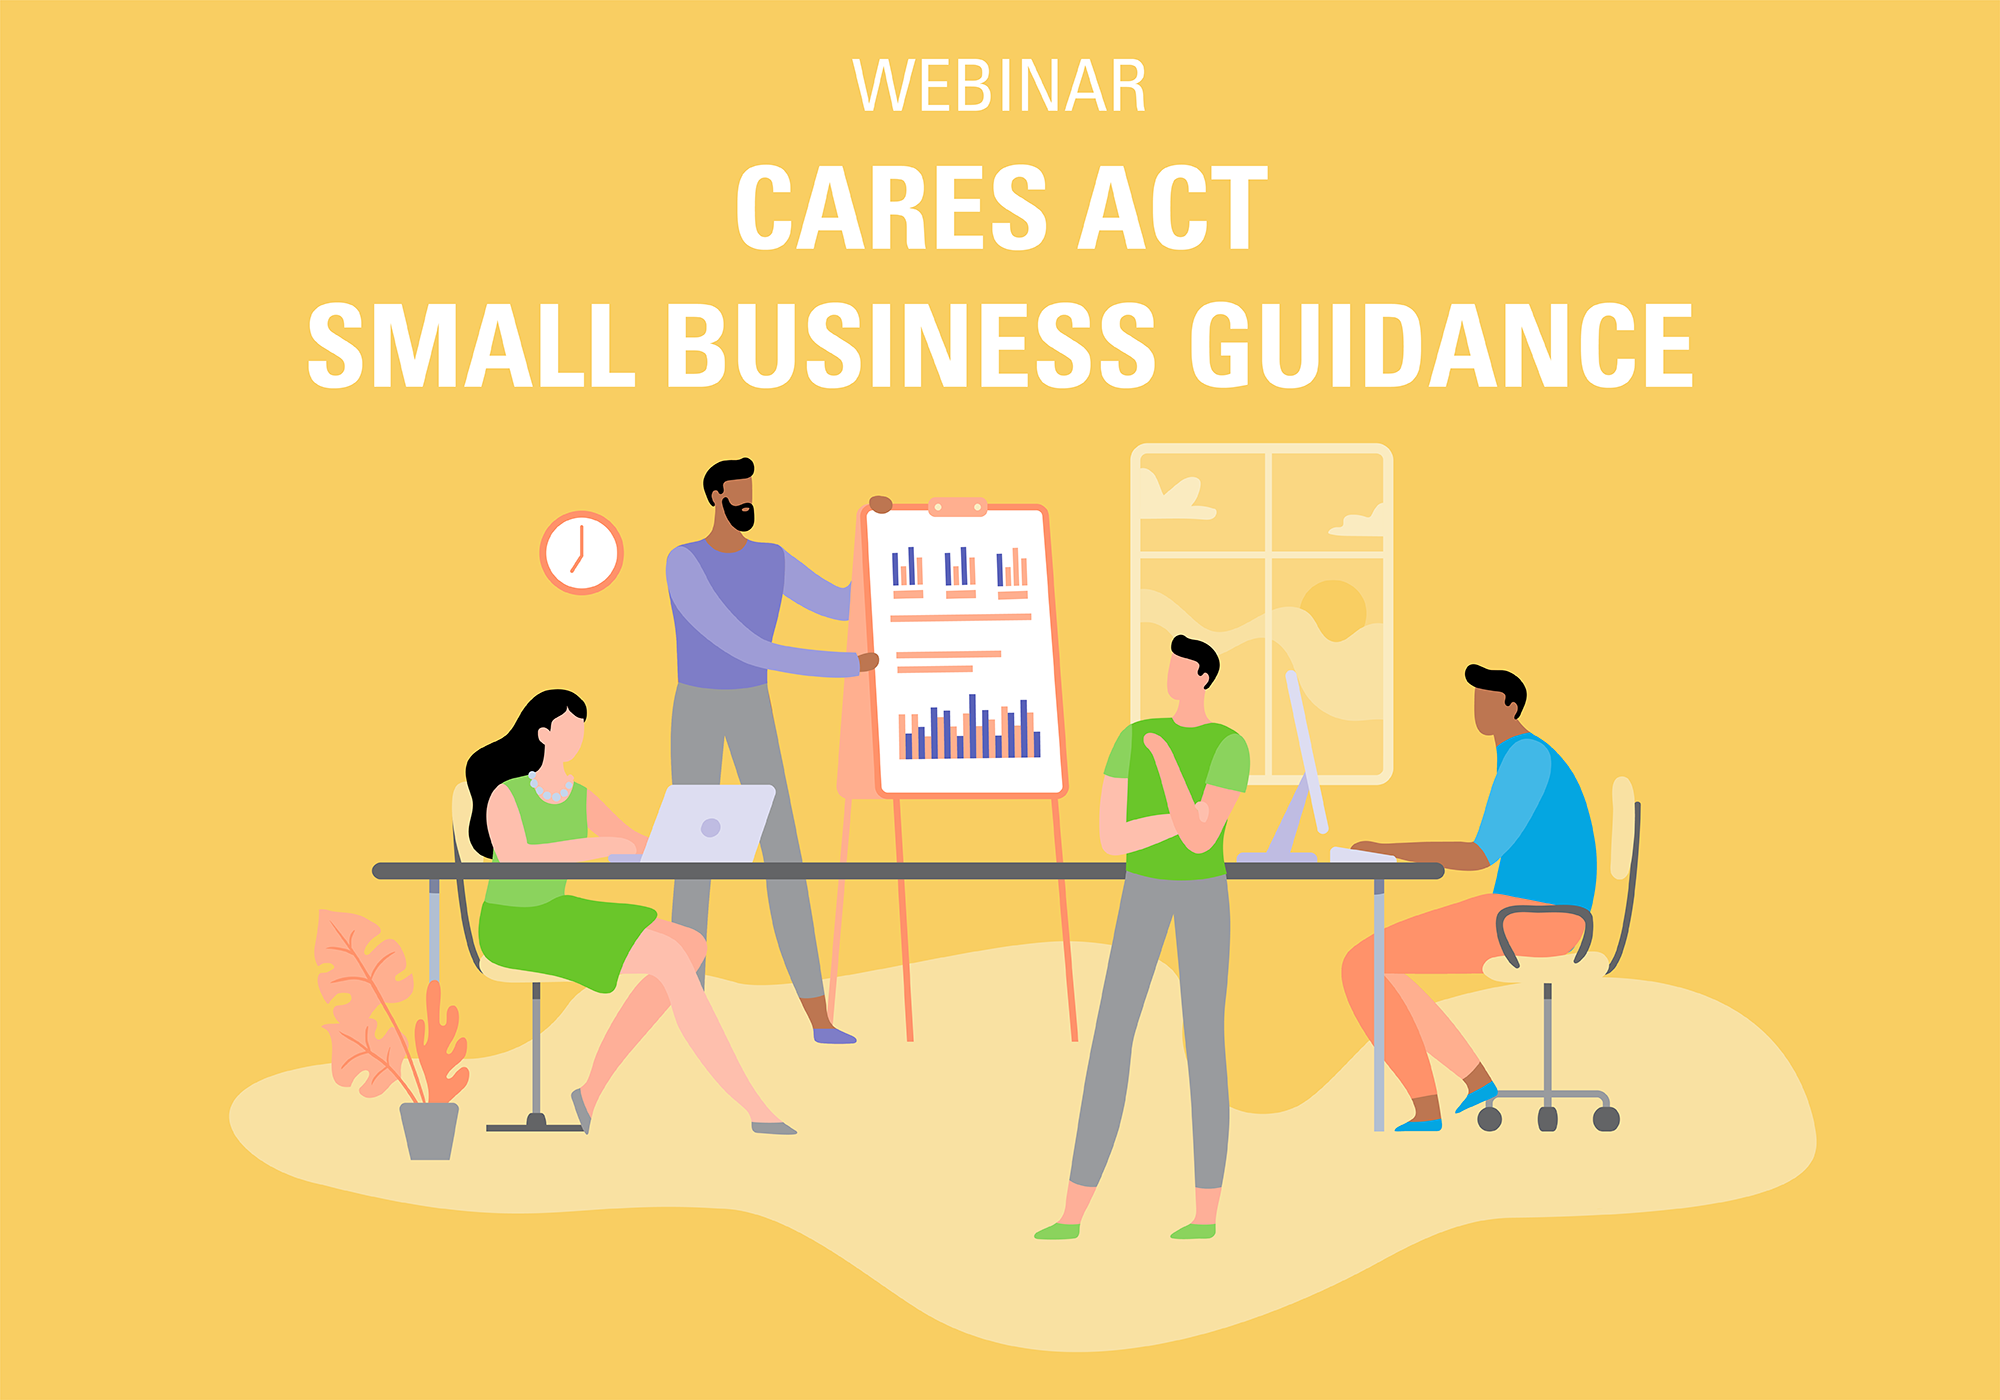 Webinar - Cares act small business guidance graphic